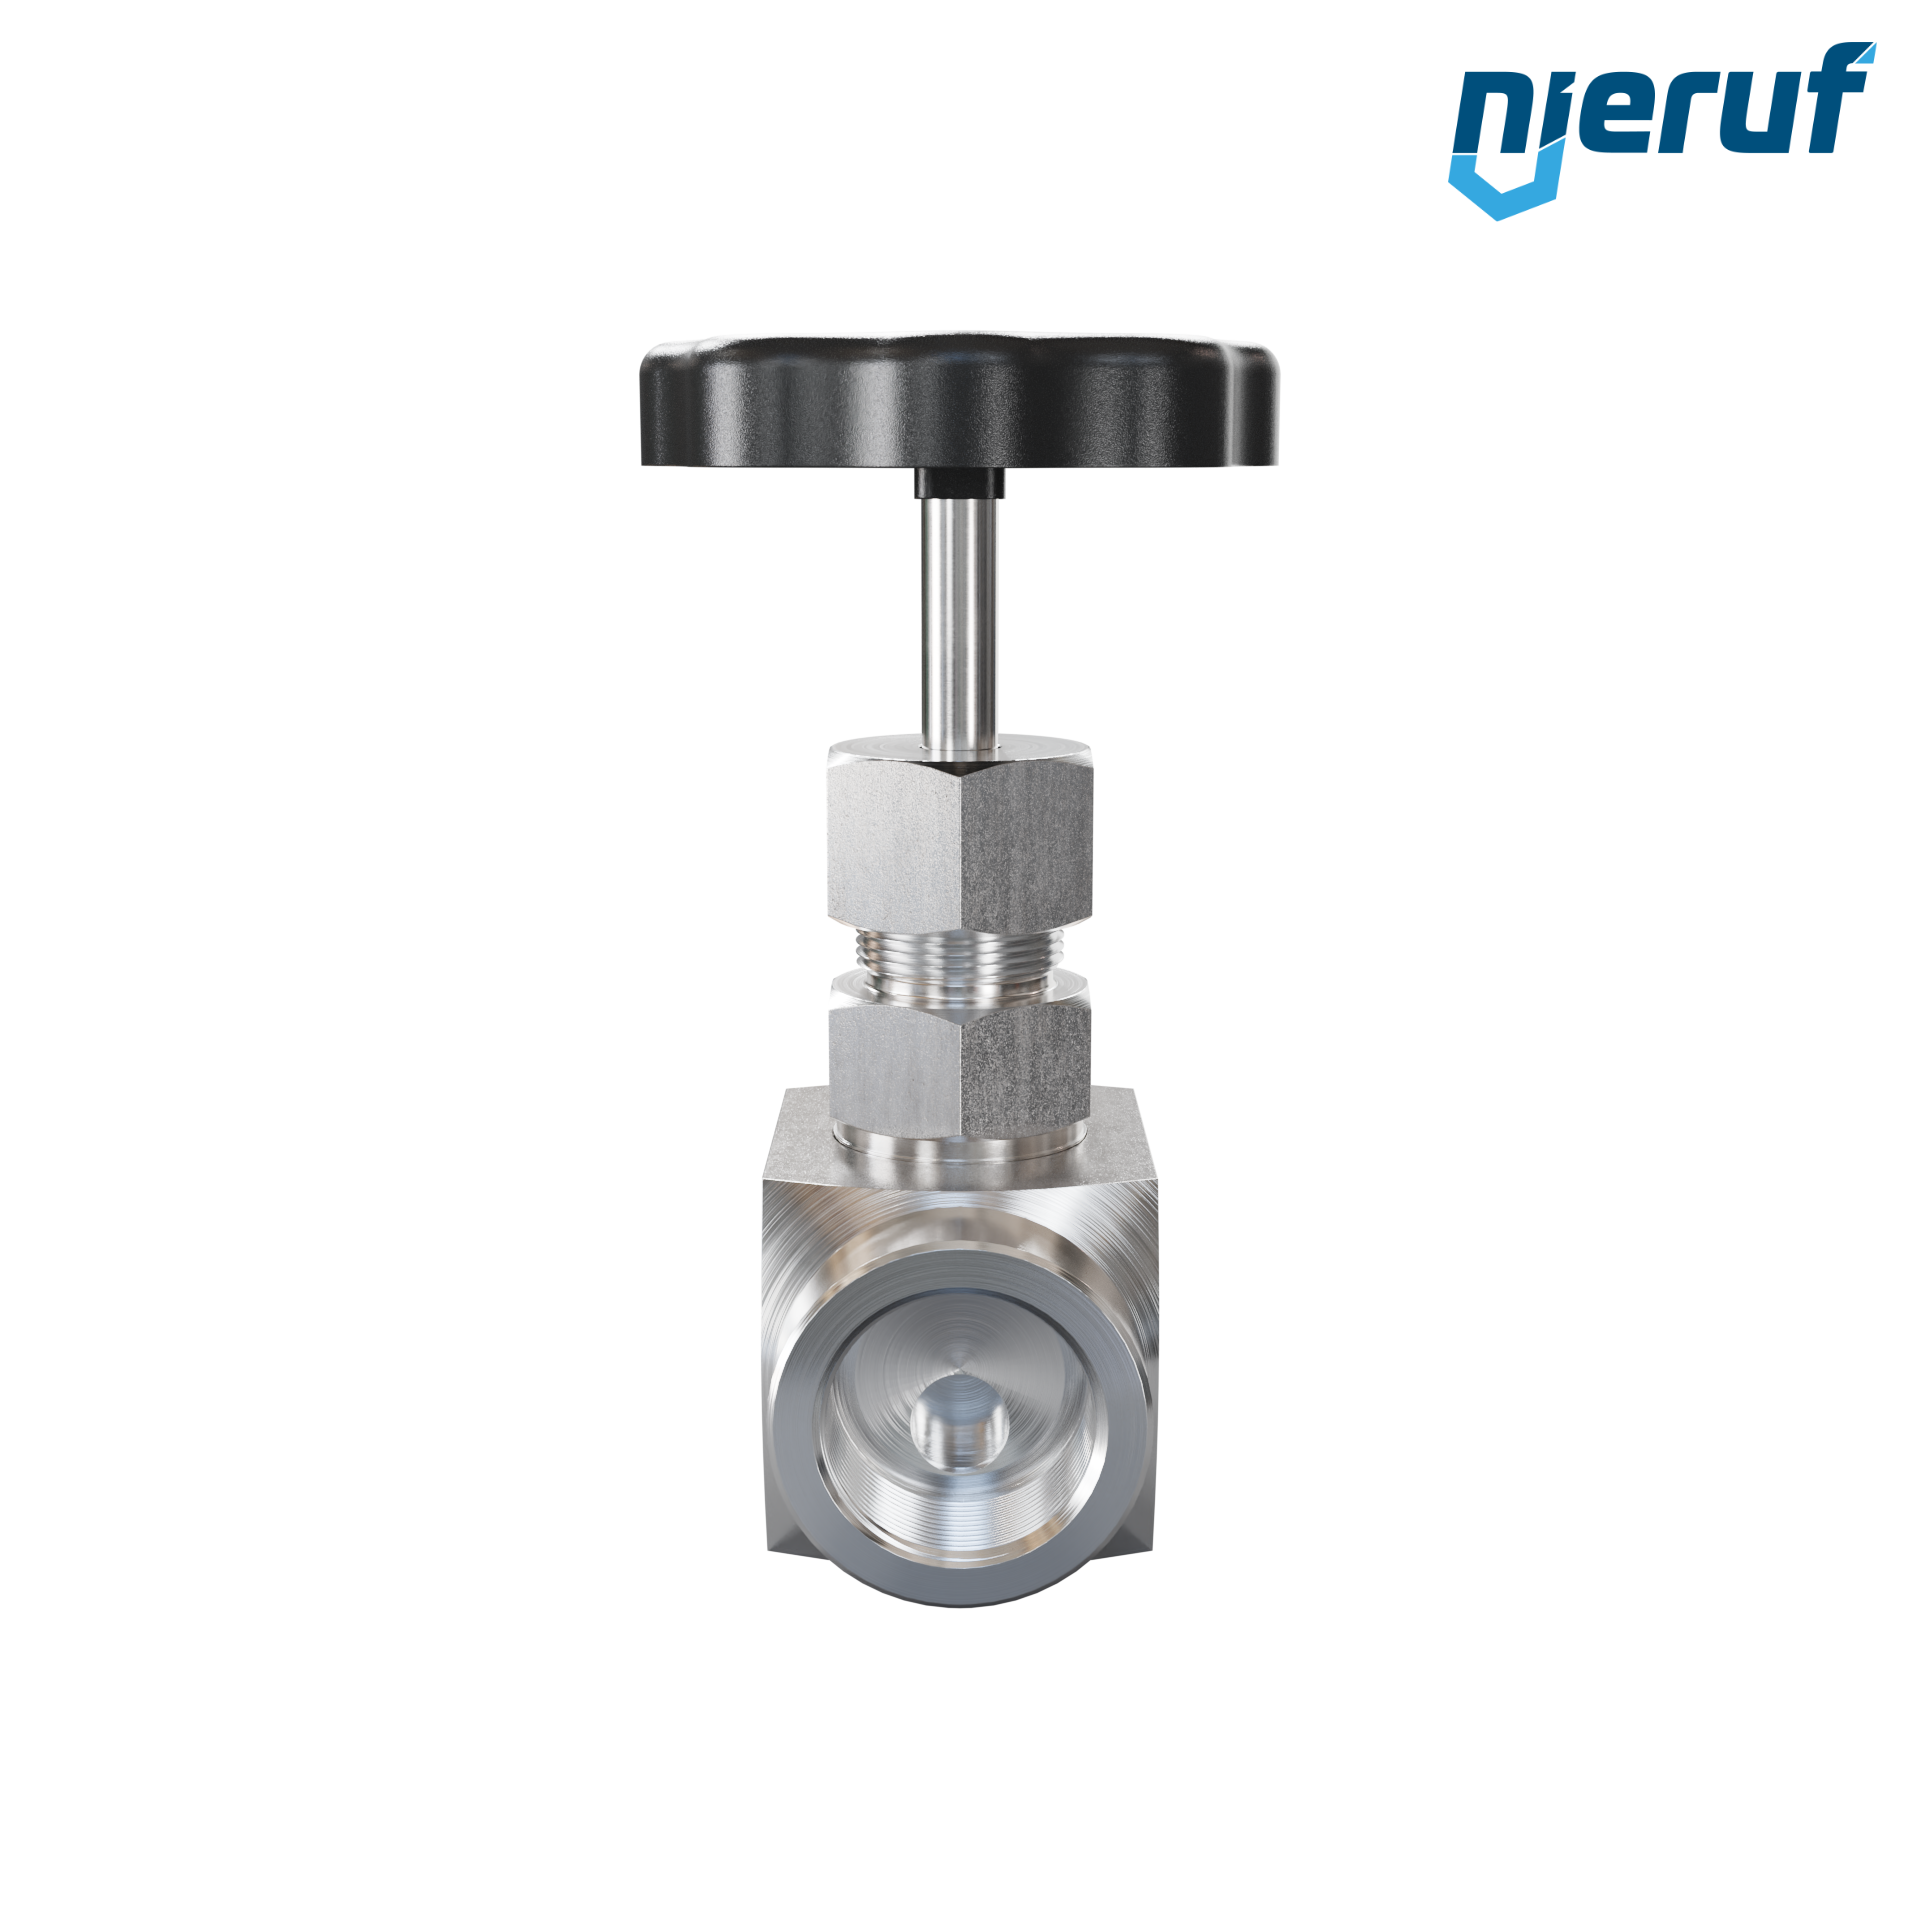 high pressure needle valve  1 1/4" inch NV01 stainless steel 1.4571